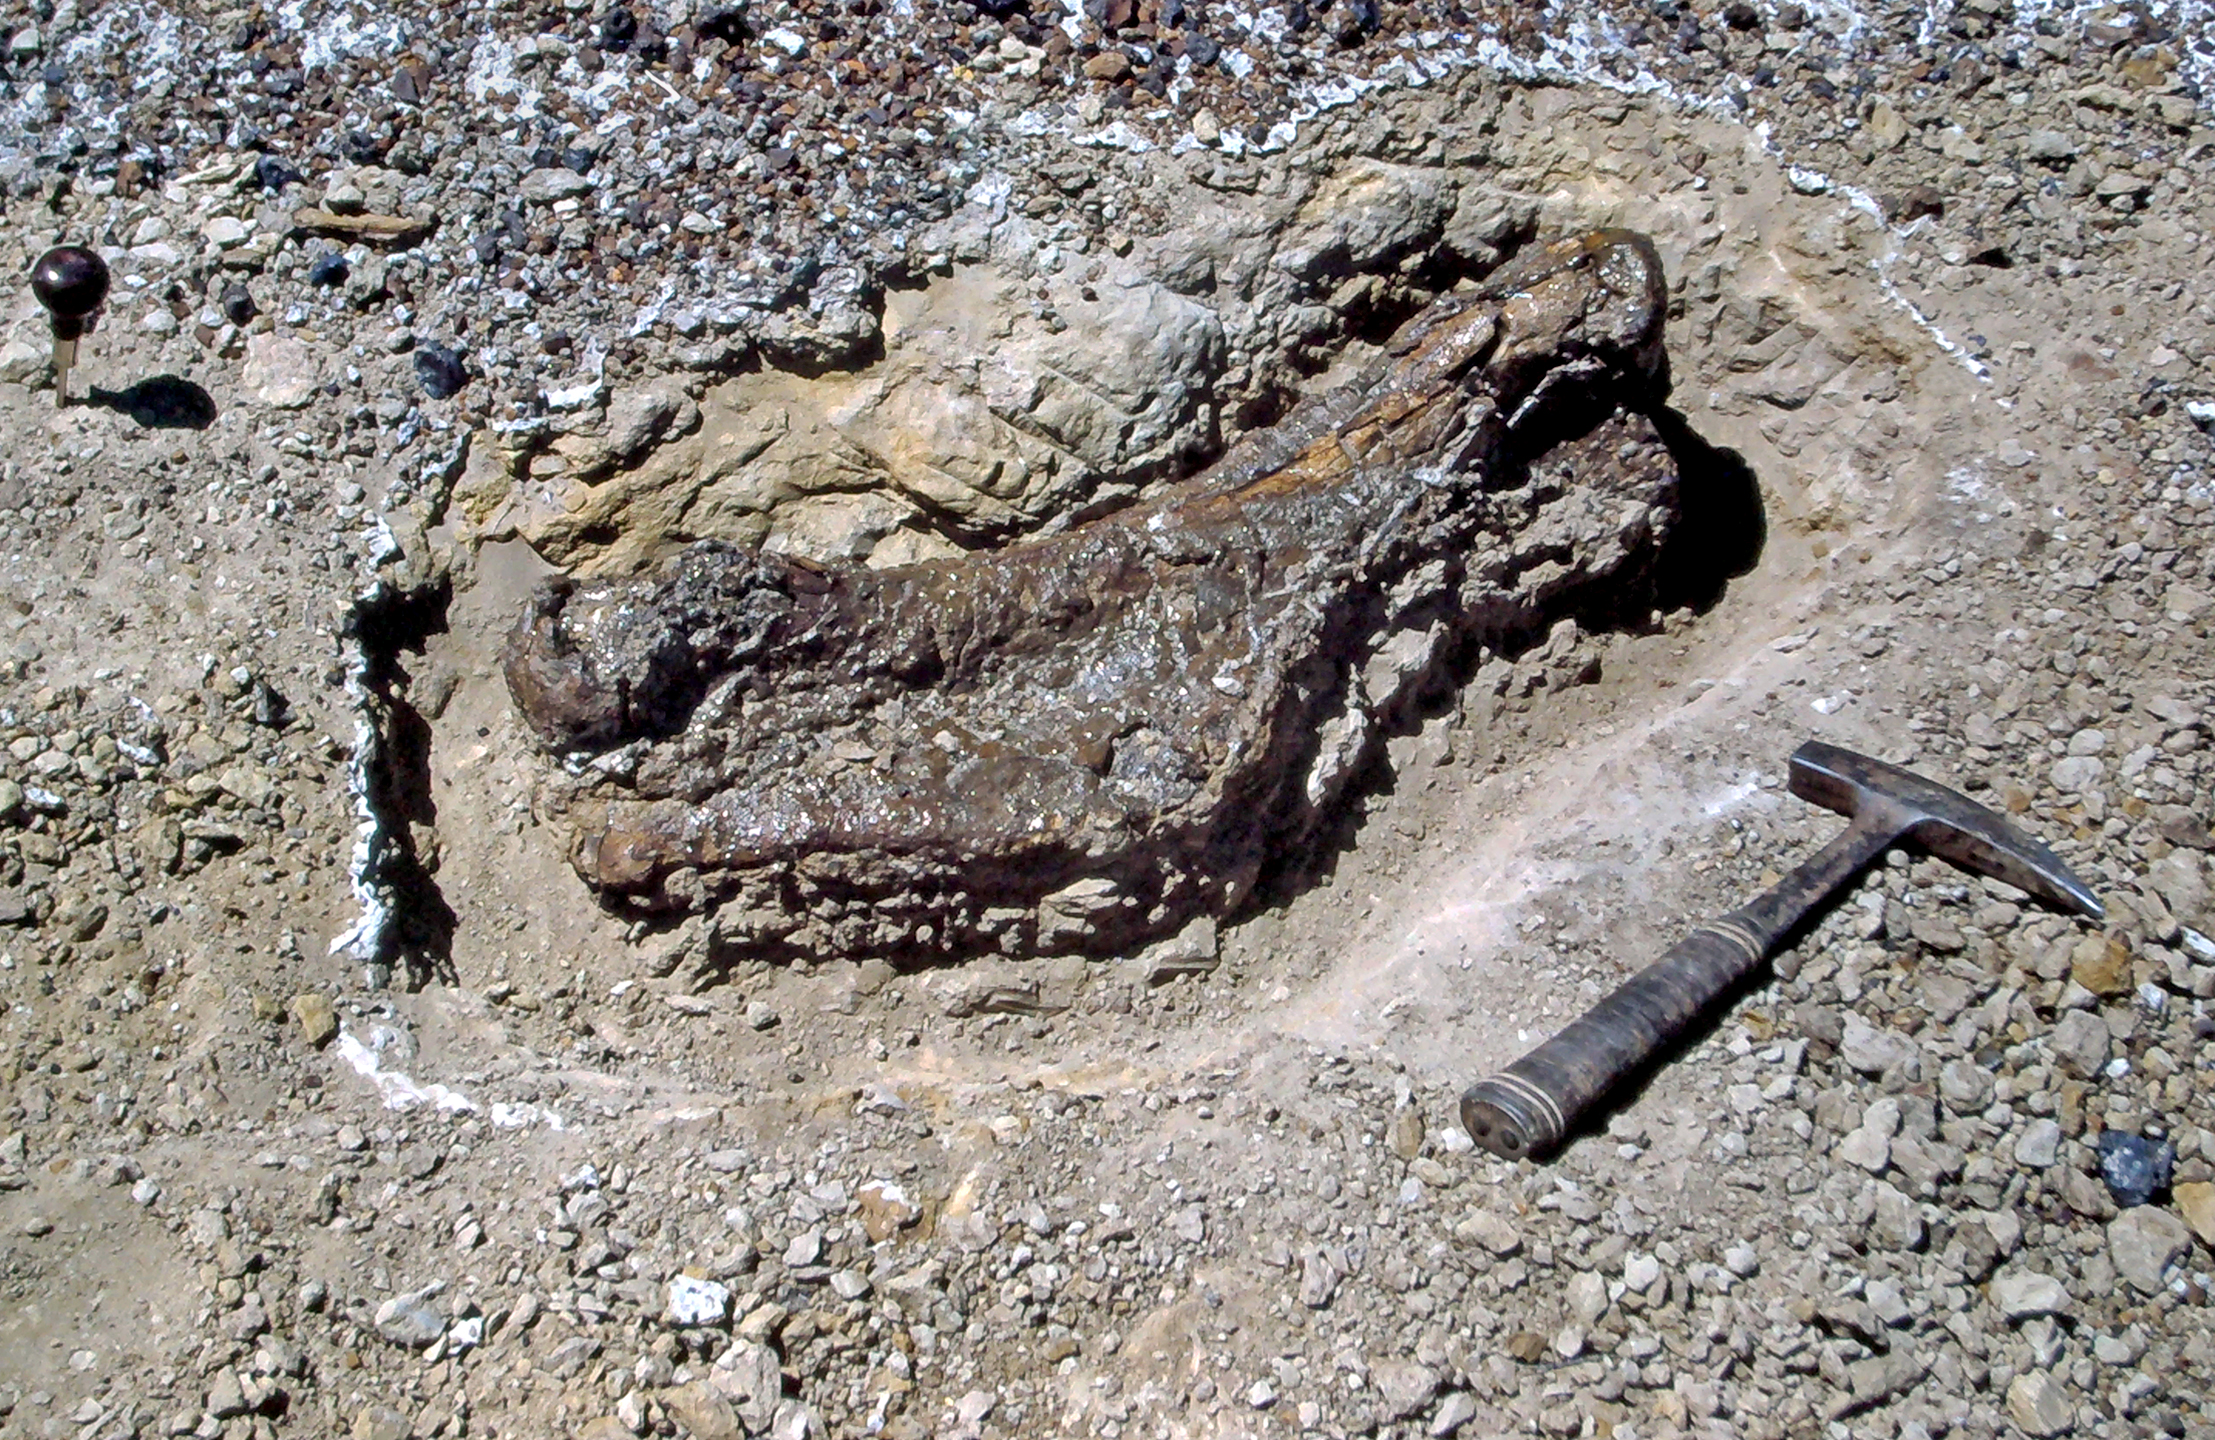 A bone fossil exposed in the dirt and rocks next to a pick axe.